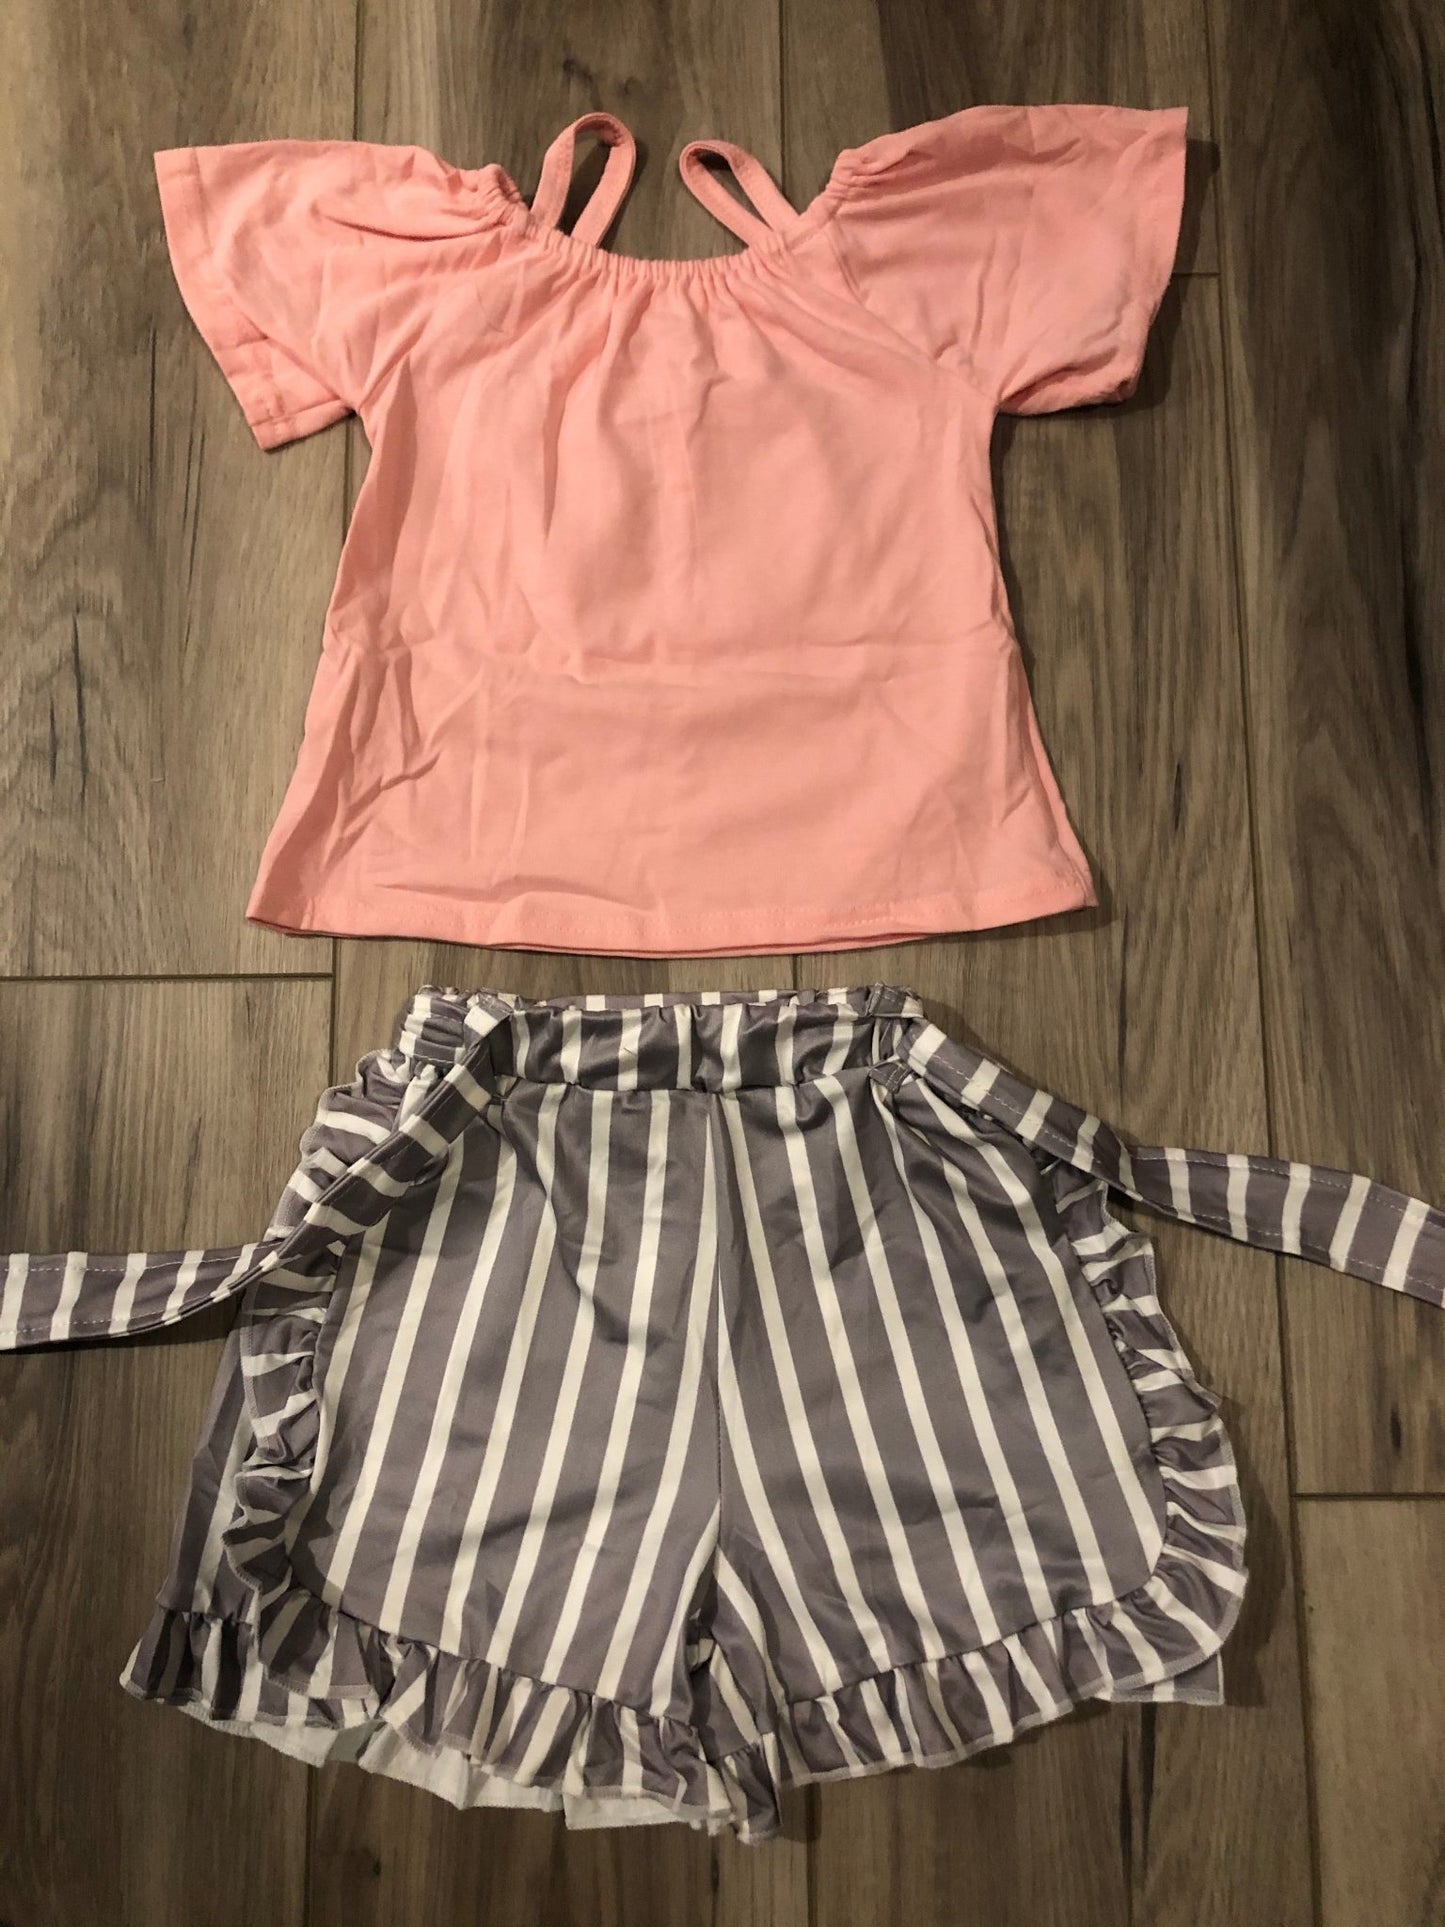 Pink top and Striped Short Set